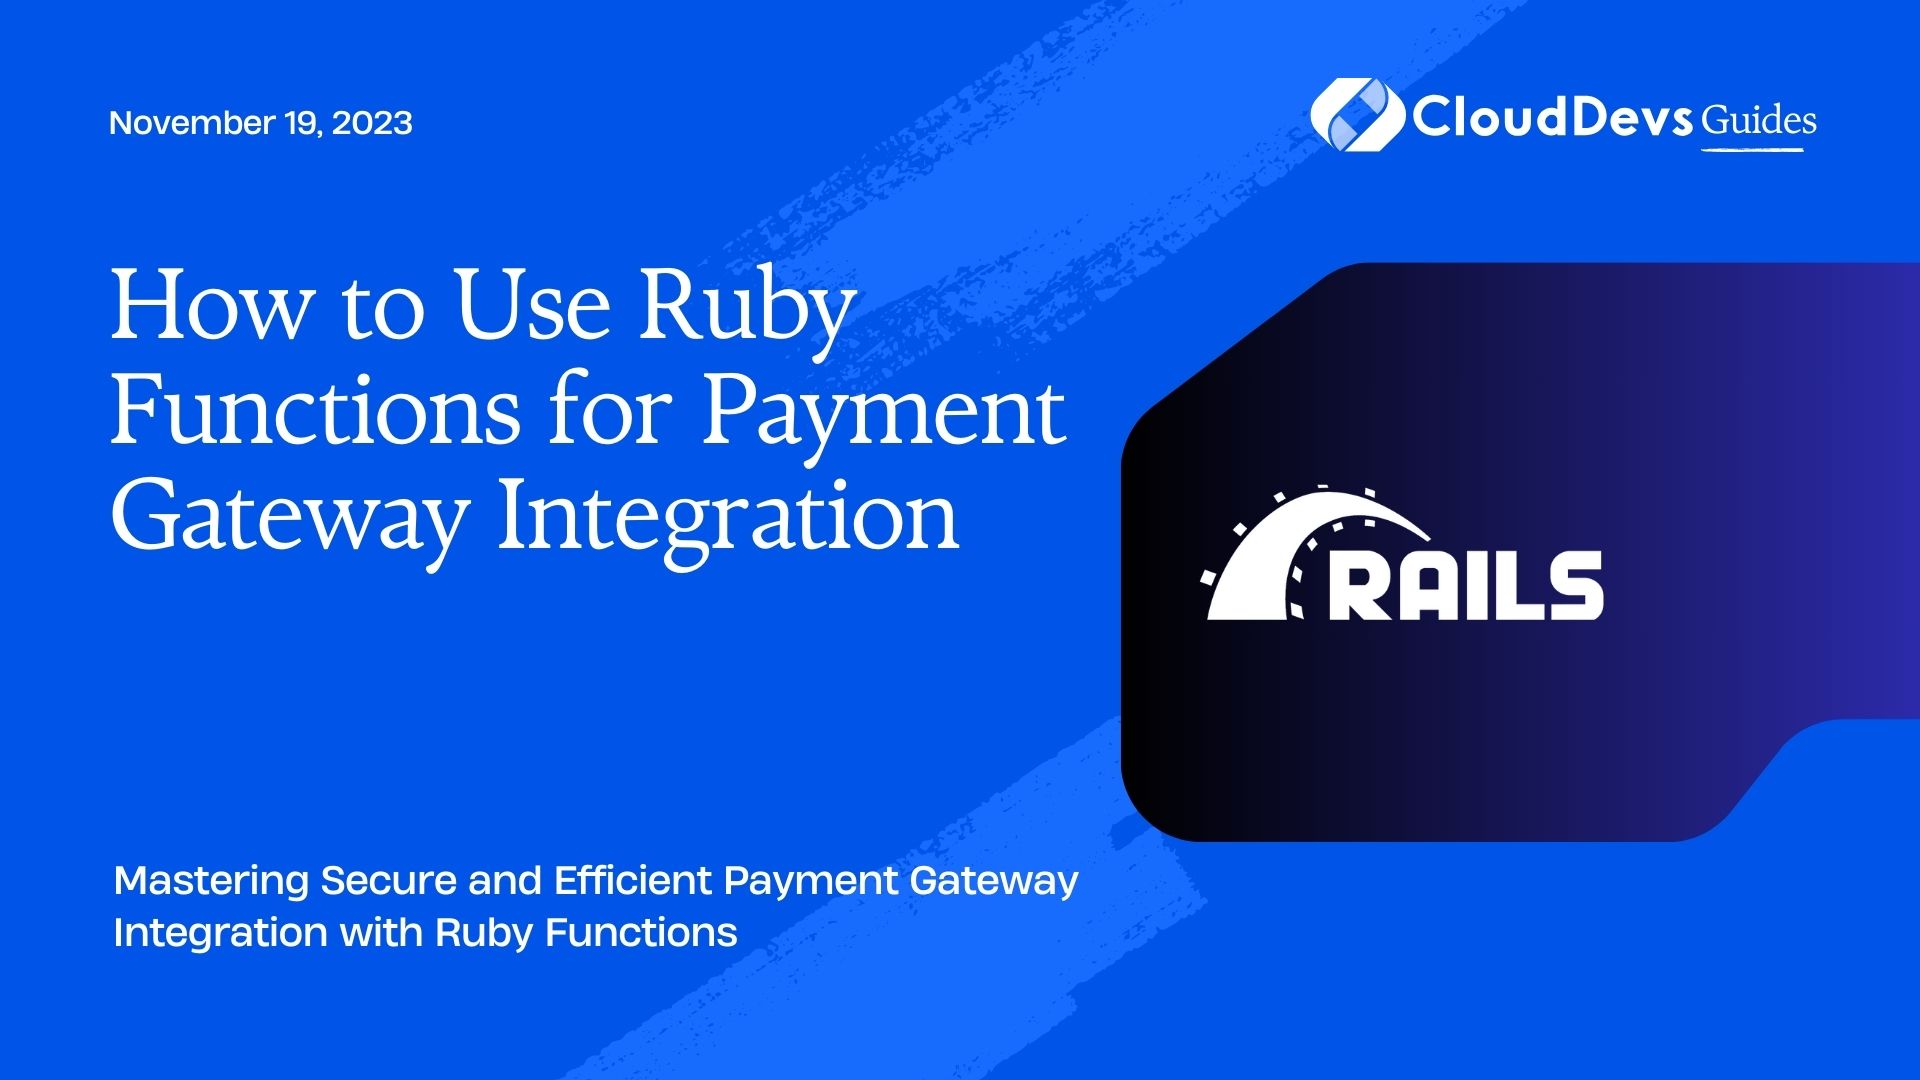 How to Use Ruby Functions for Payment Gateway Integration